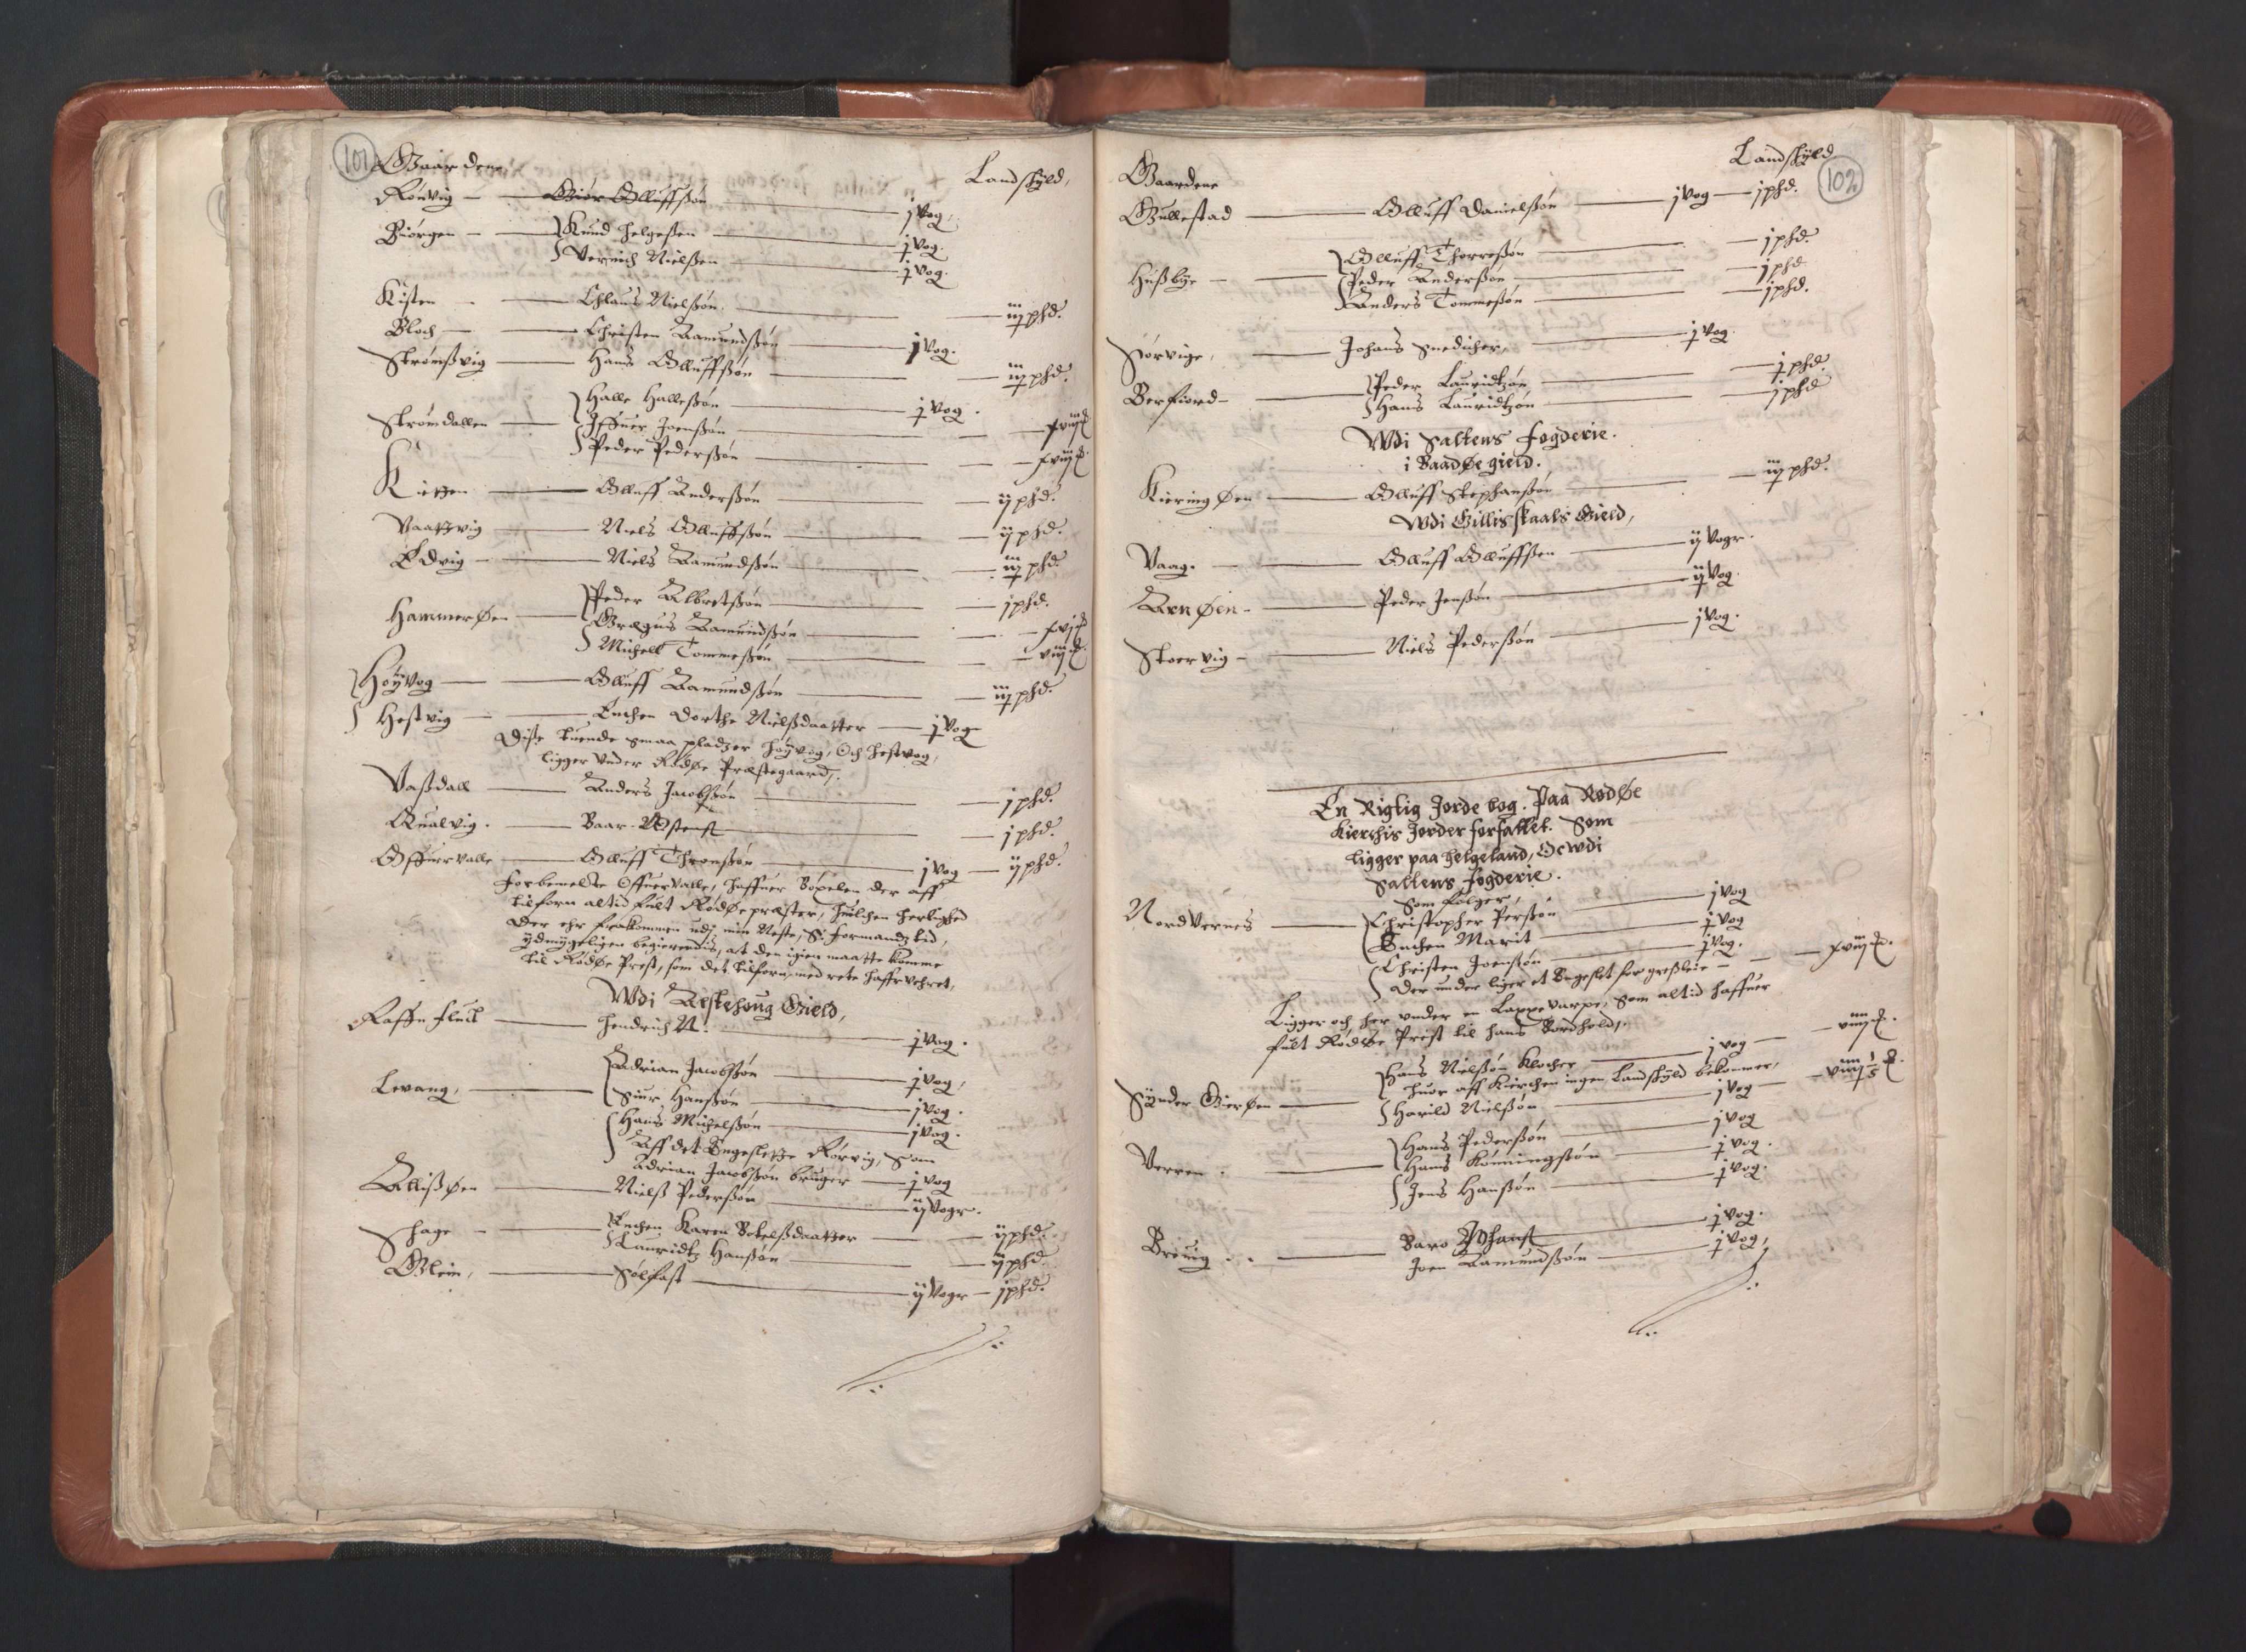 RA, Vicar's Census 1664-1666, no. 35: Helgeland deanery and Salten deanery, 1664-1666, p. 101-102